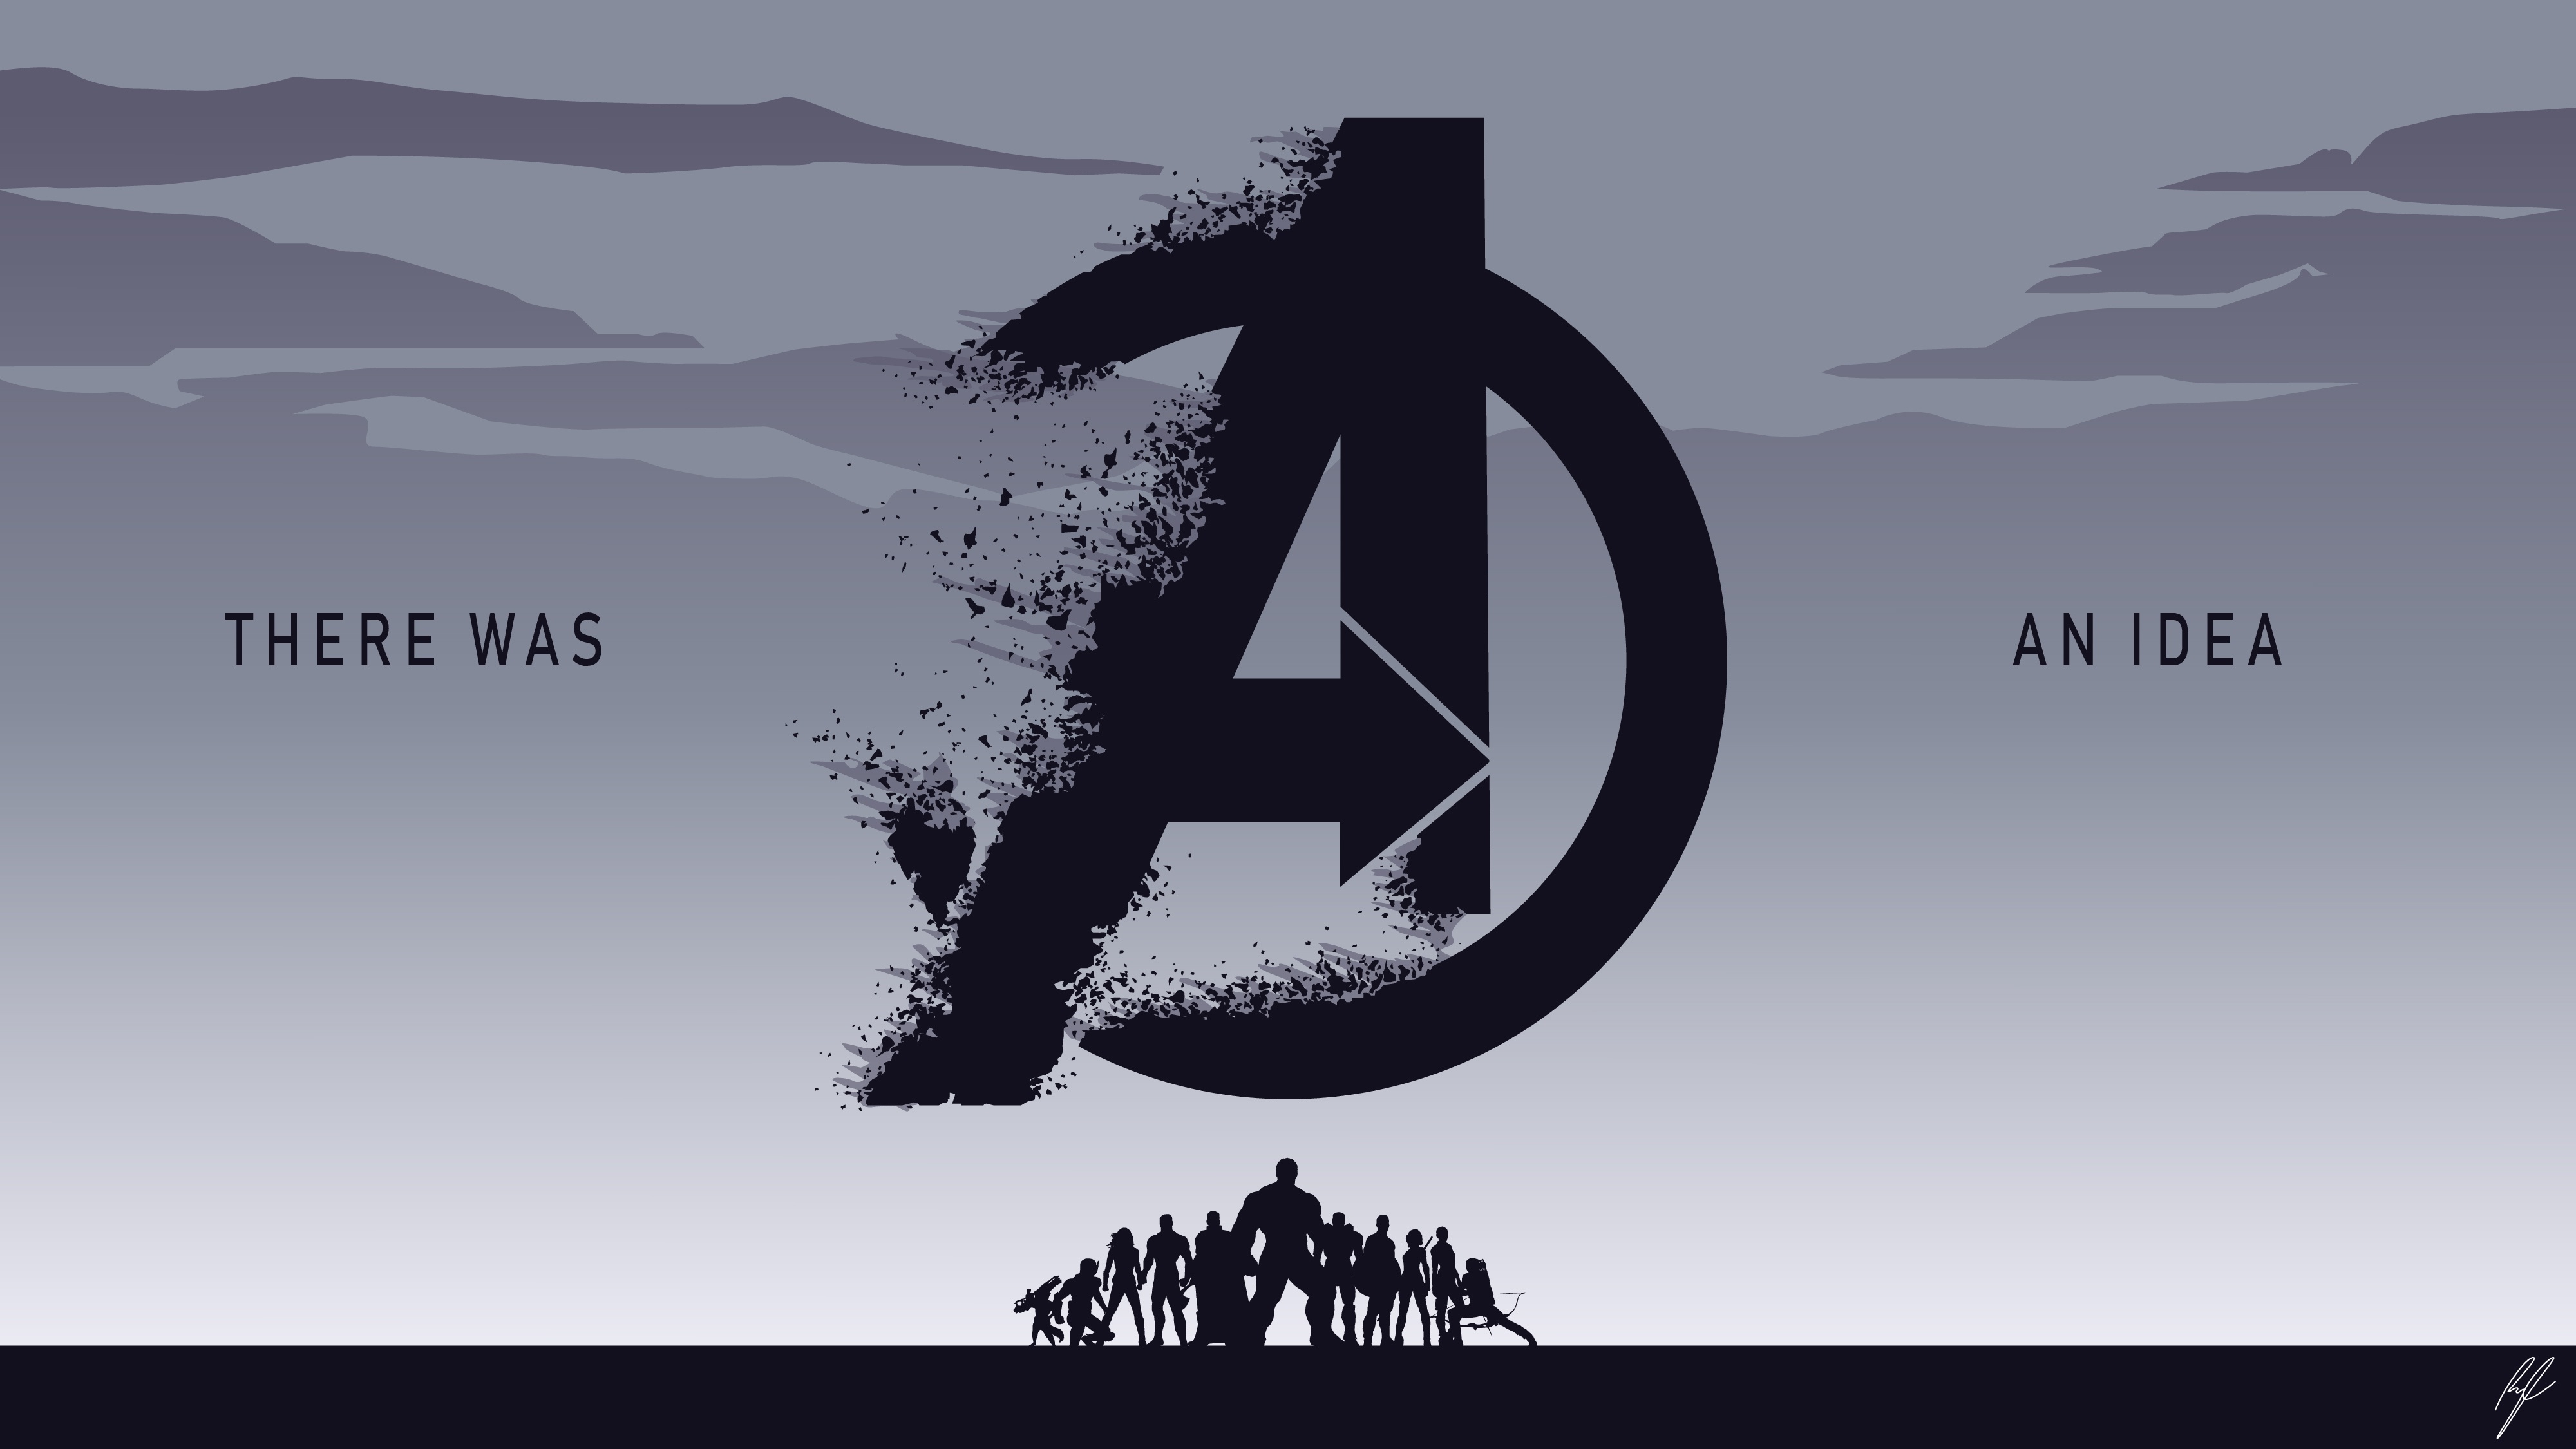 Captain America 4K Red Minimalist Wallpapers